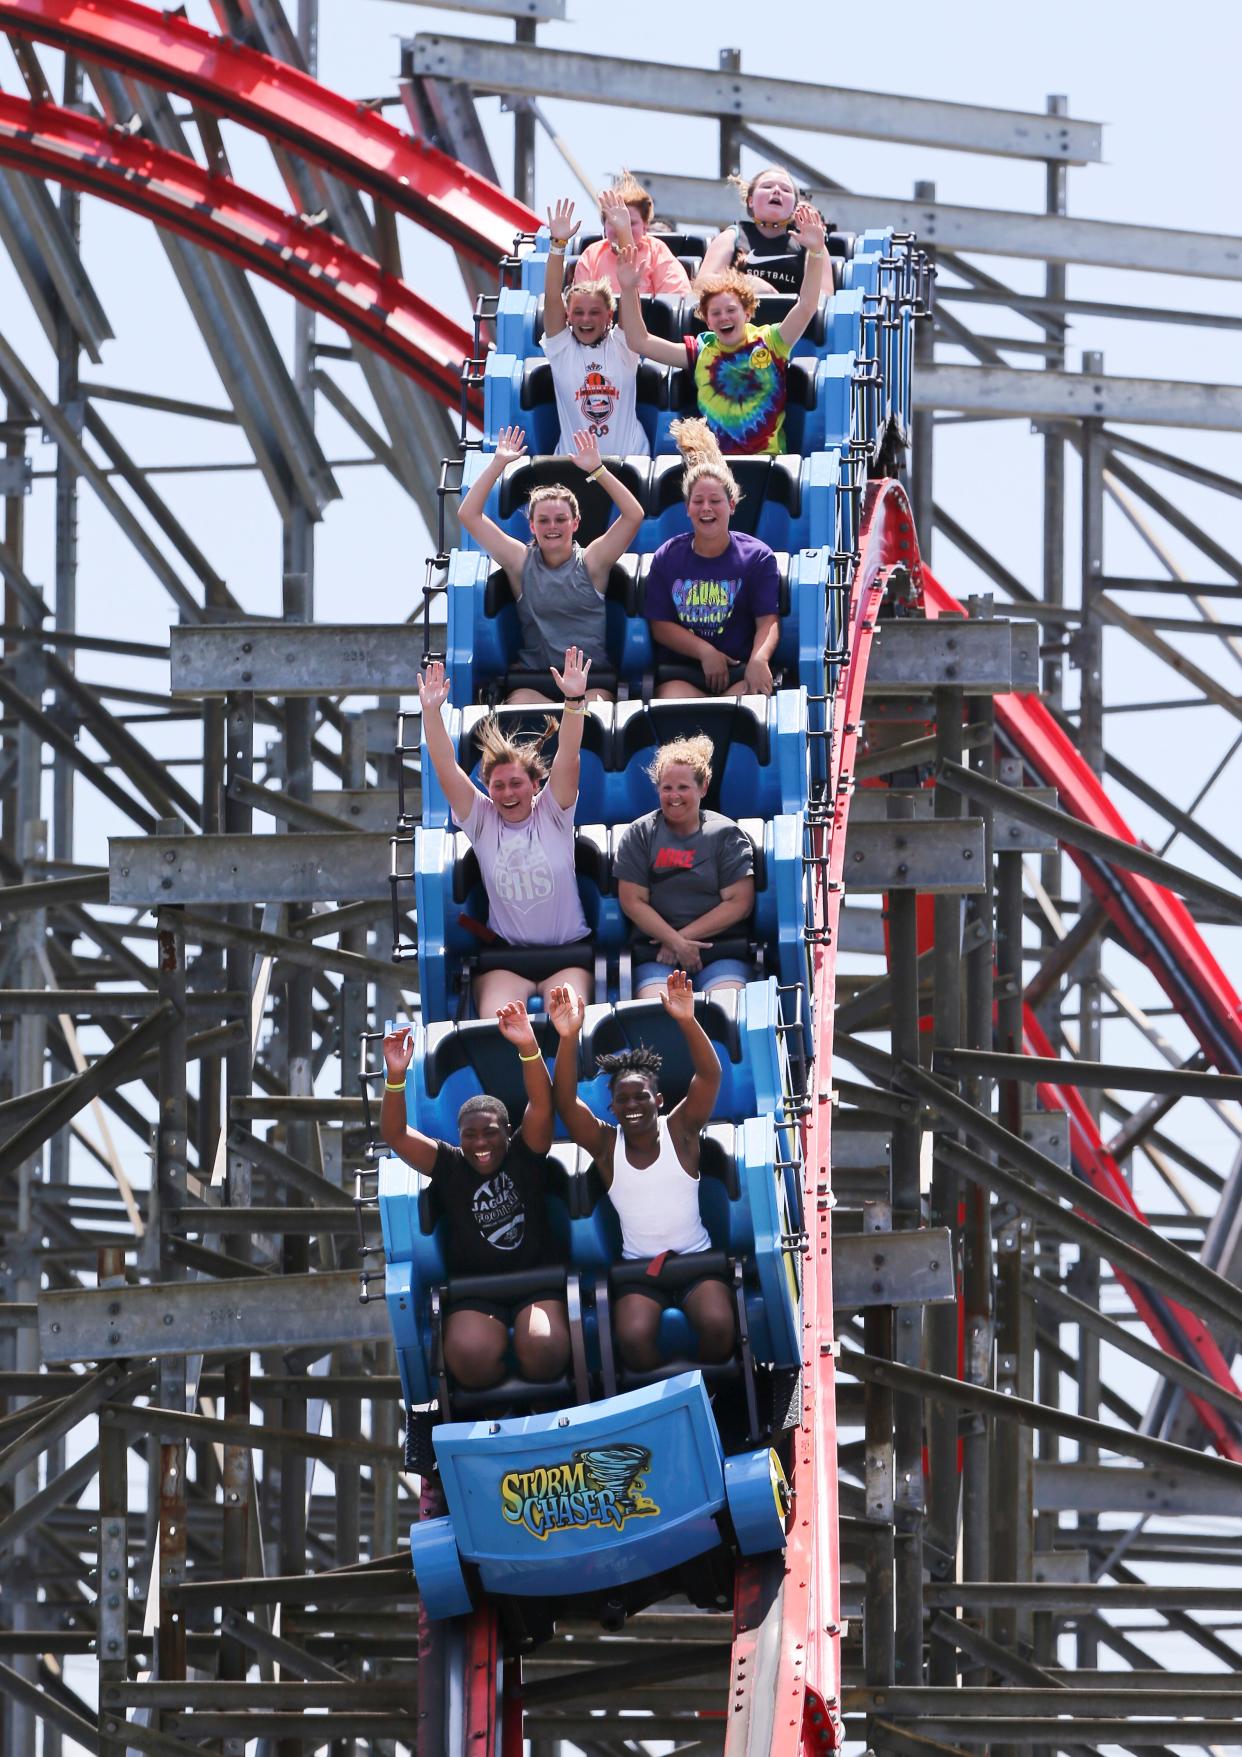 Kentucky Kingdom is one of several nearby amusement parks with new attractions this year.